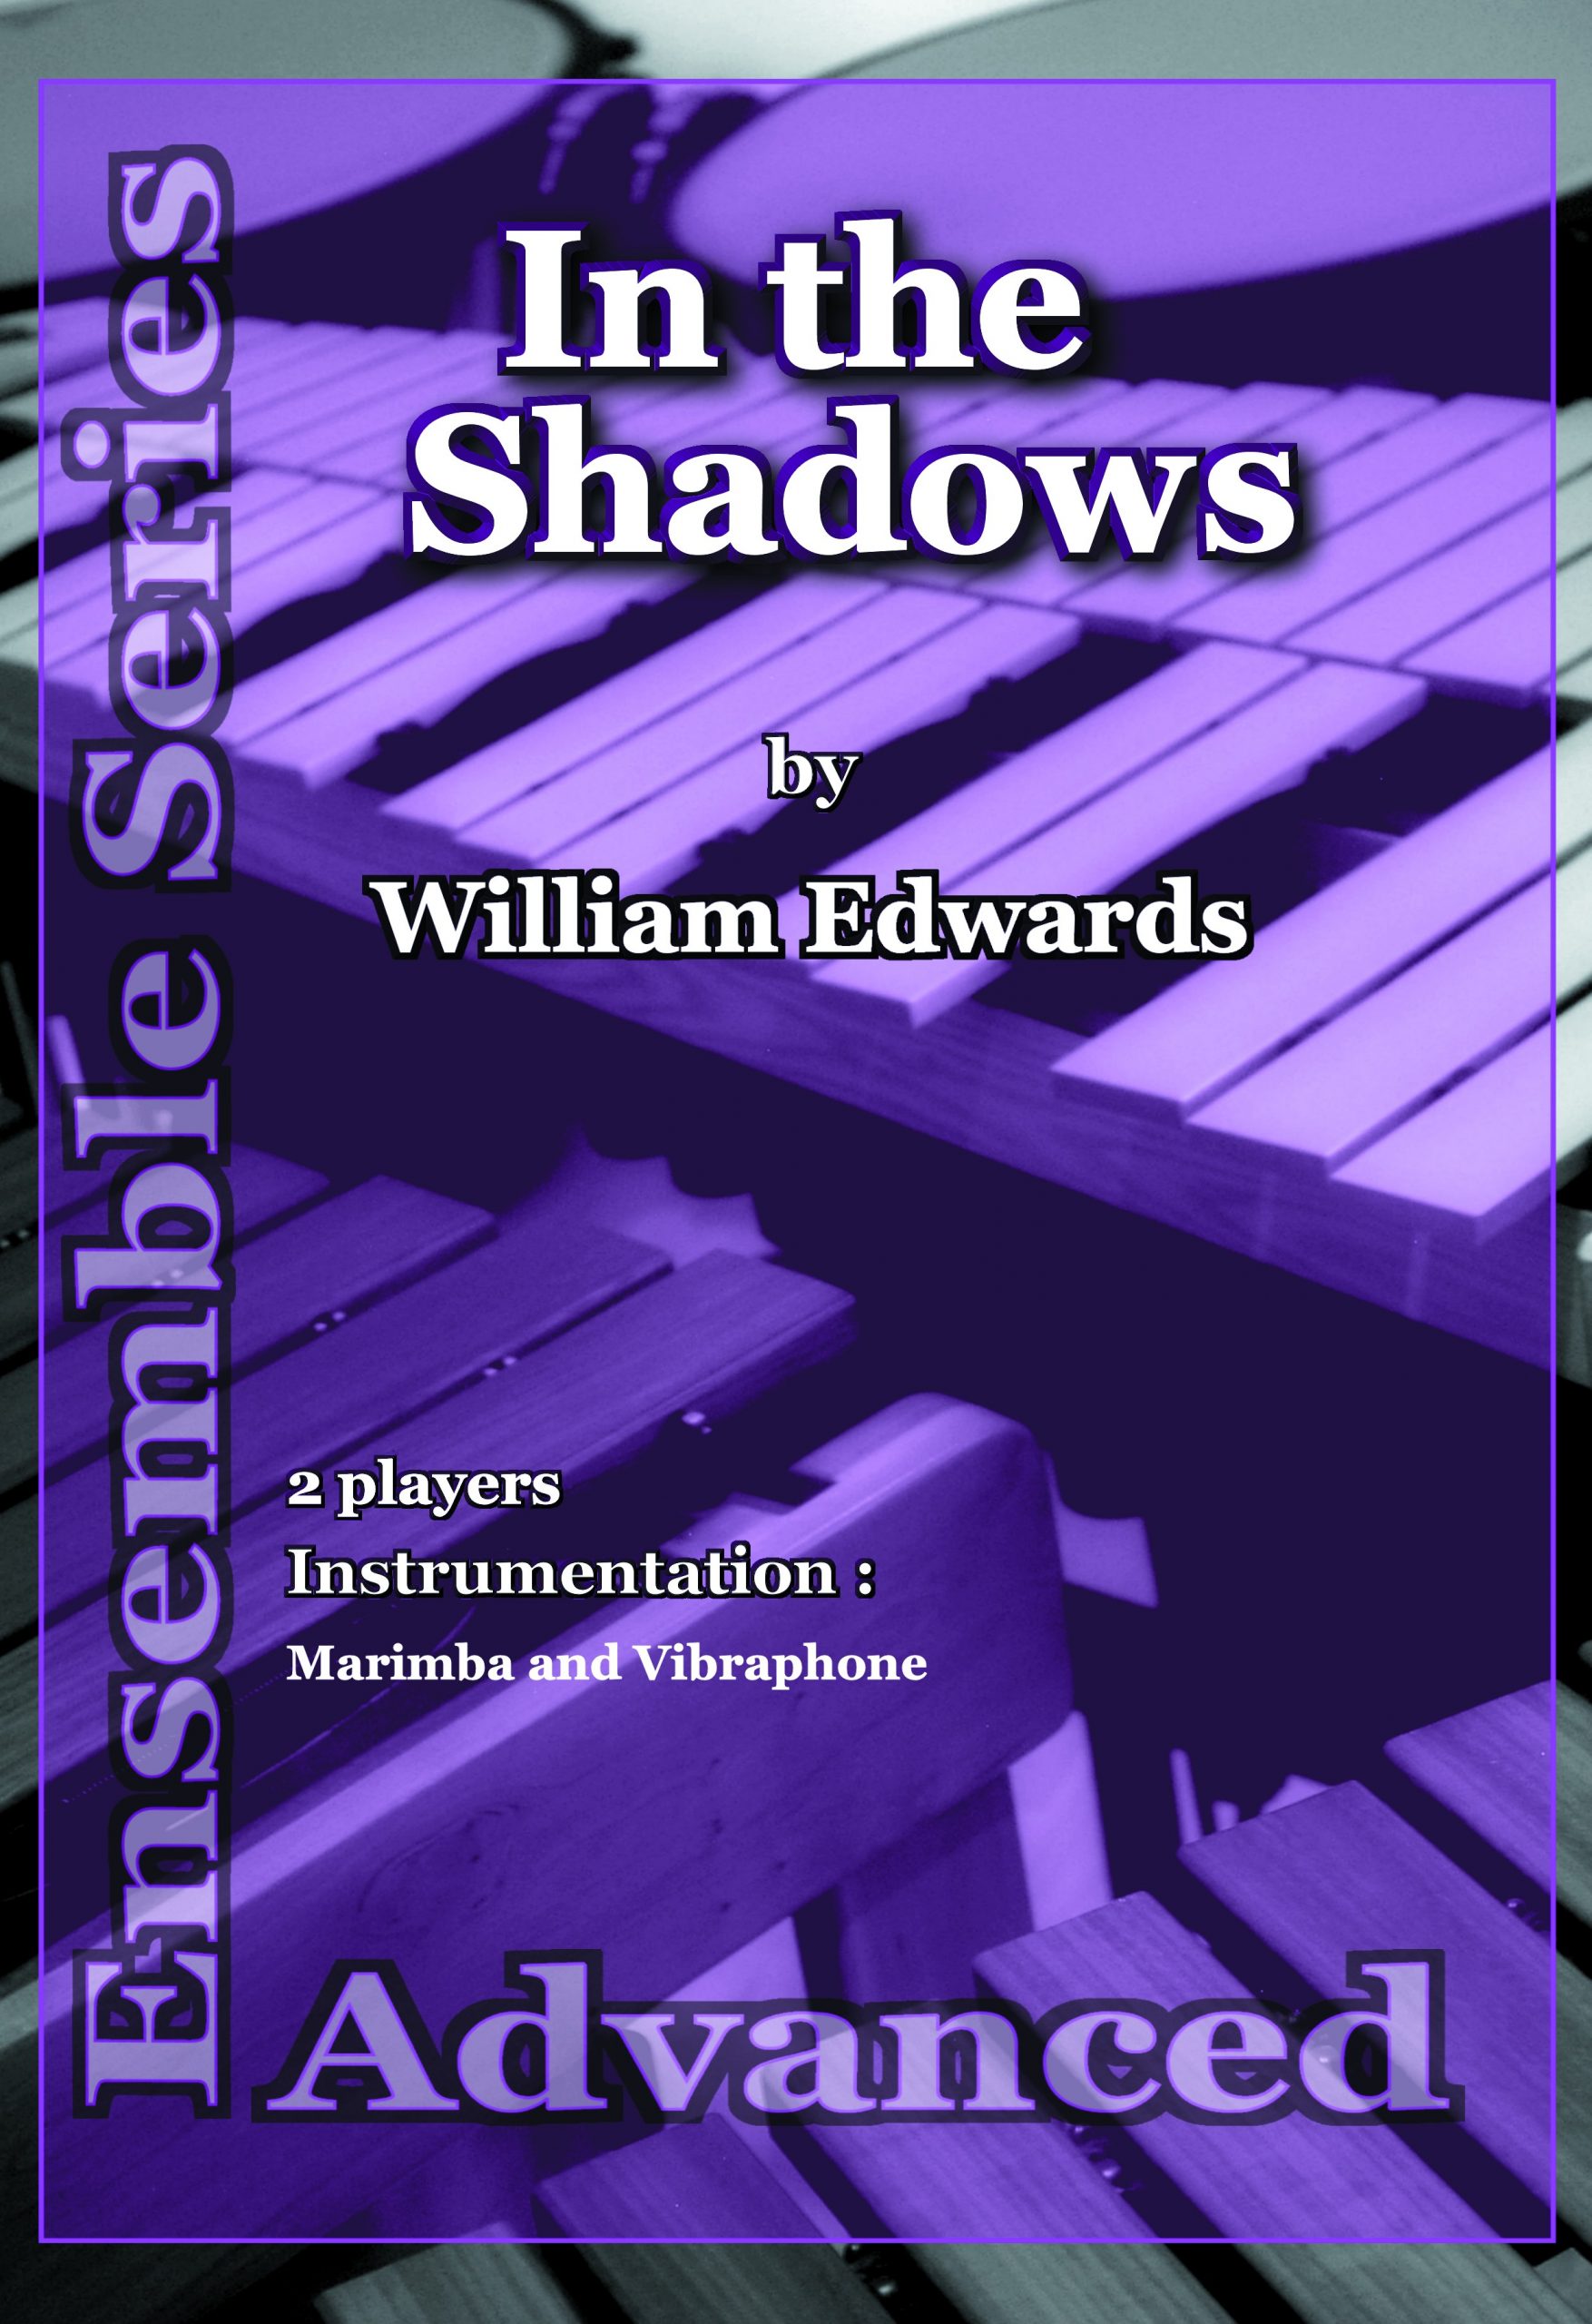 In the Shadows by William Edwards